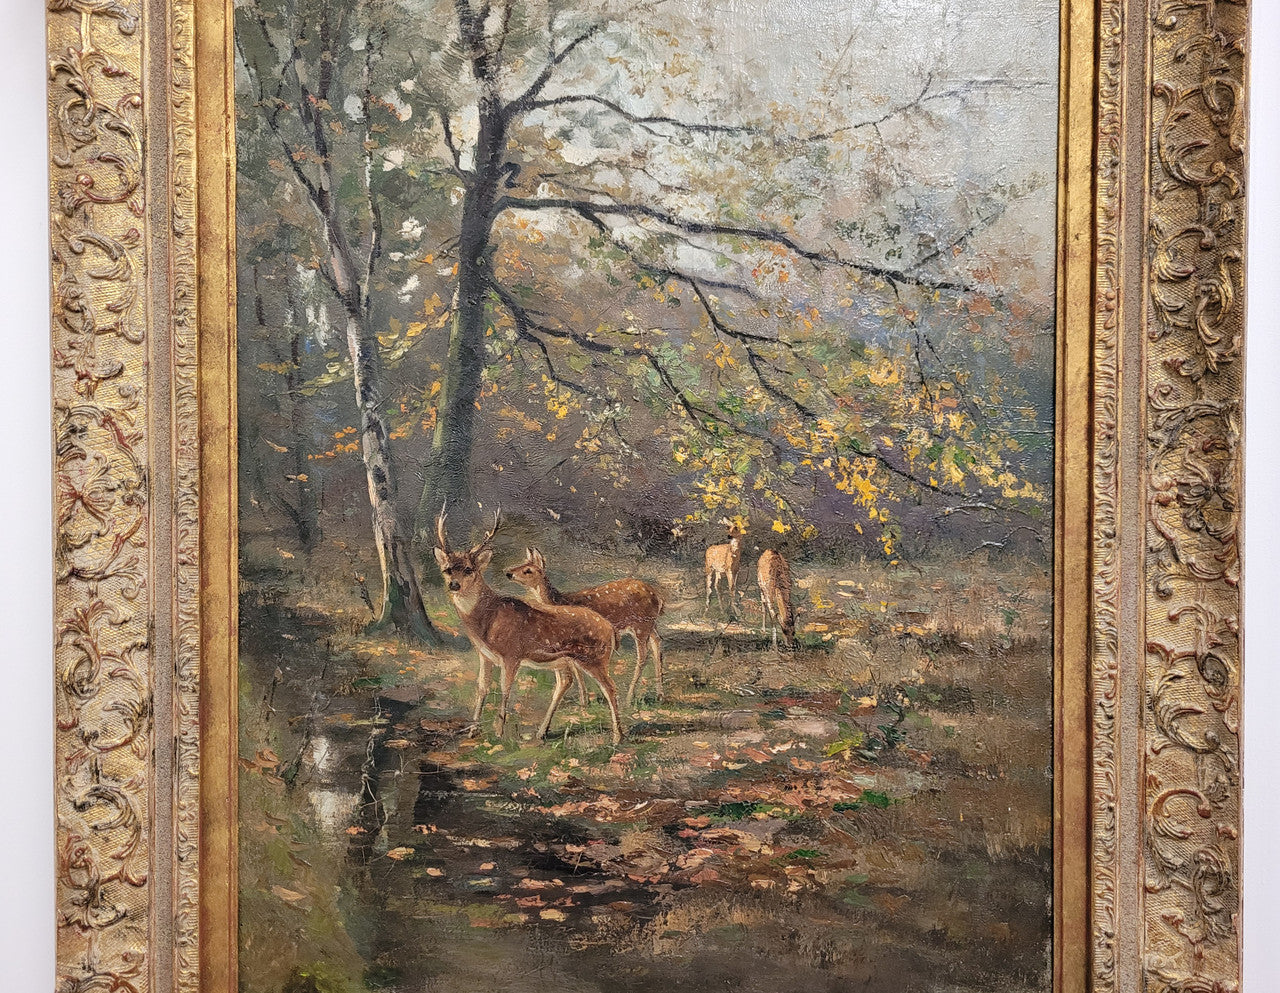 Charming oil painting on canvas depicting a forest scene and deer in an ornate gilt frame. In good original detailed condition.